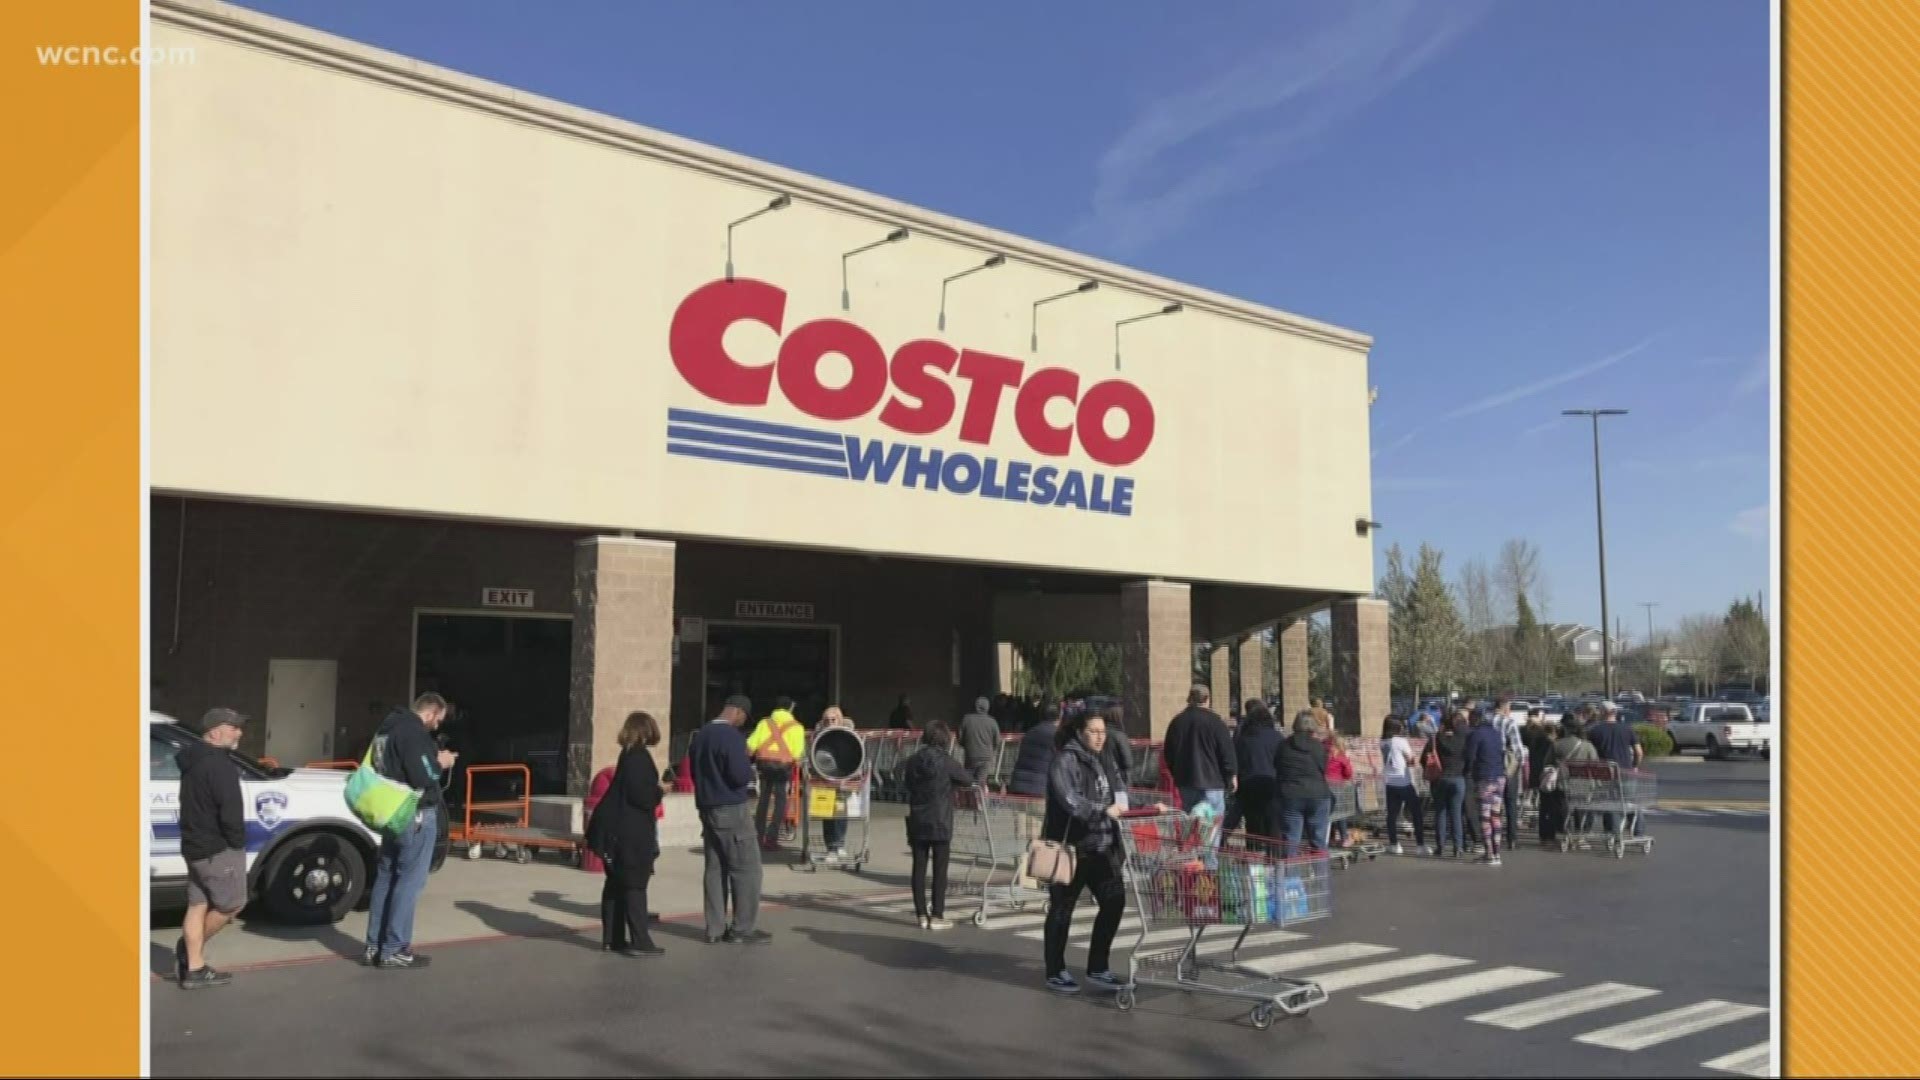 Costco announced they are starting new special hours just for seniors during the coronavirus pandemic.